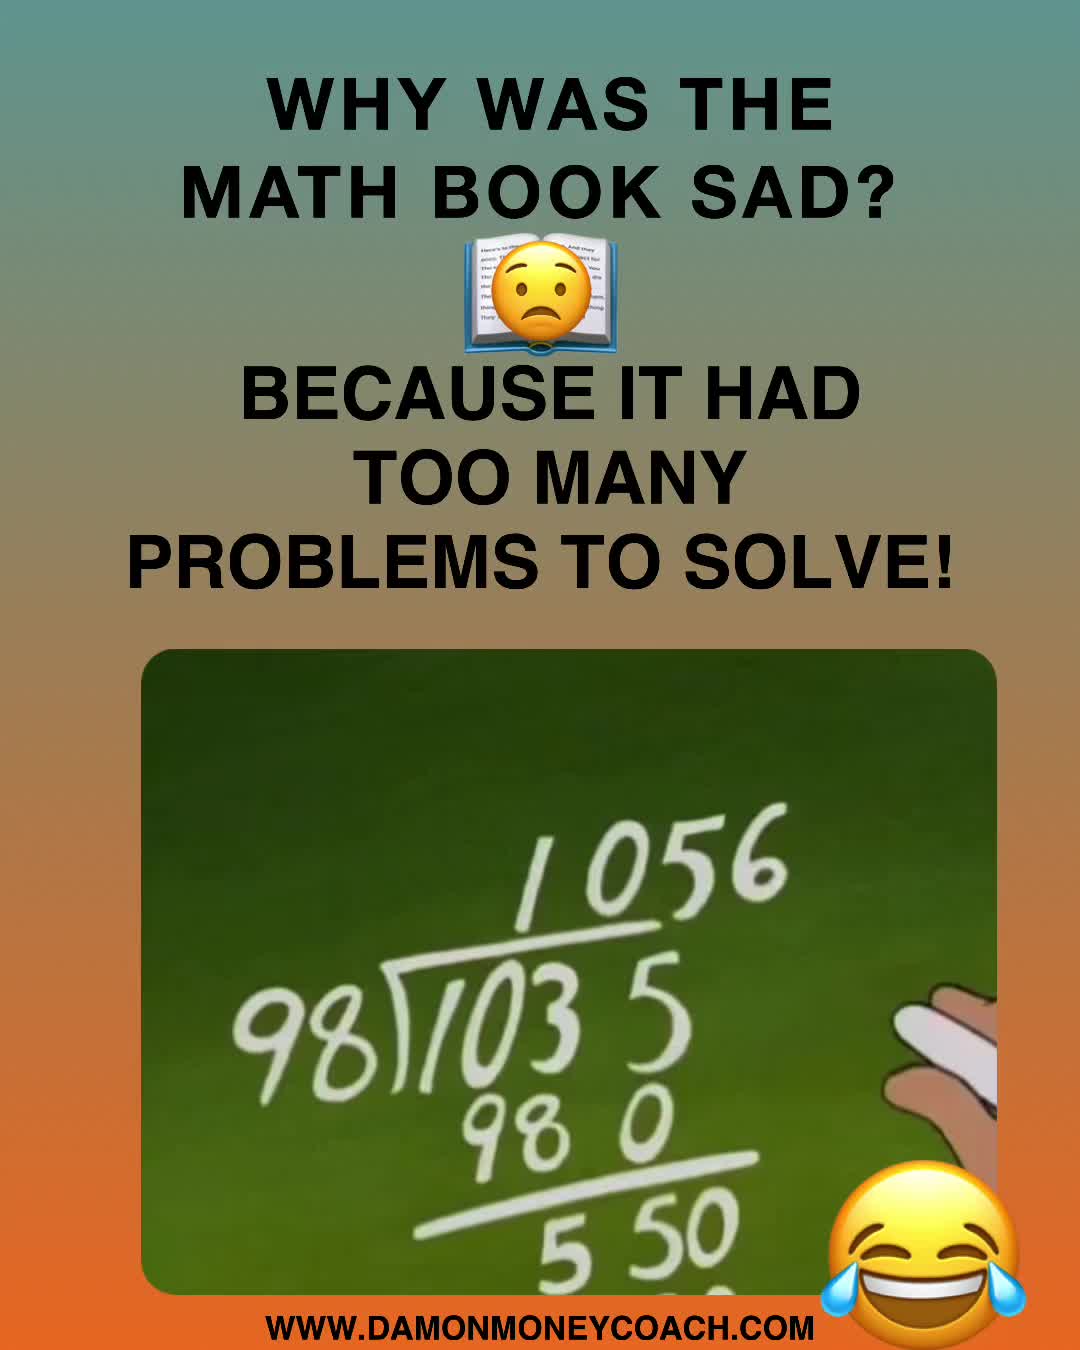 why-was-the-math-book-sad-because-it-had-too-many-problems-to-solve-www-damonmoneycoach